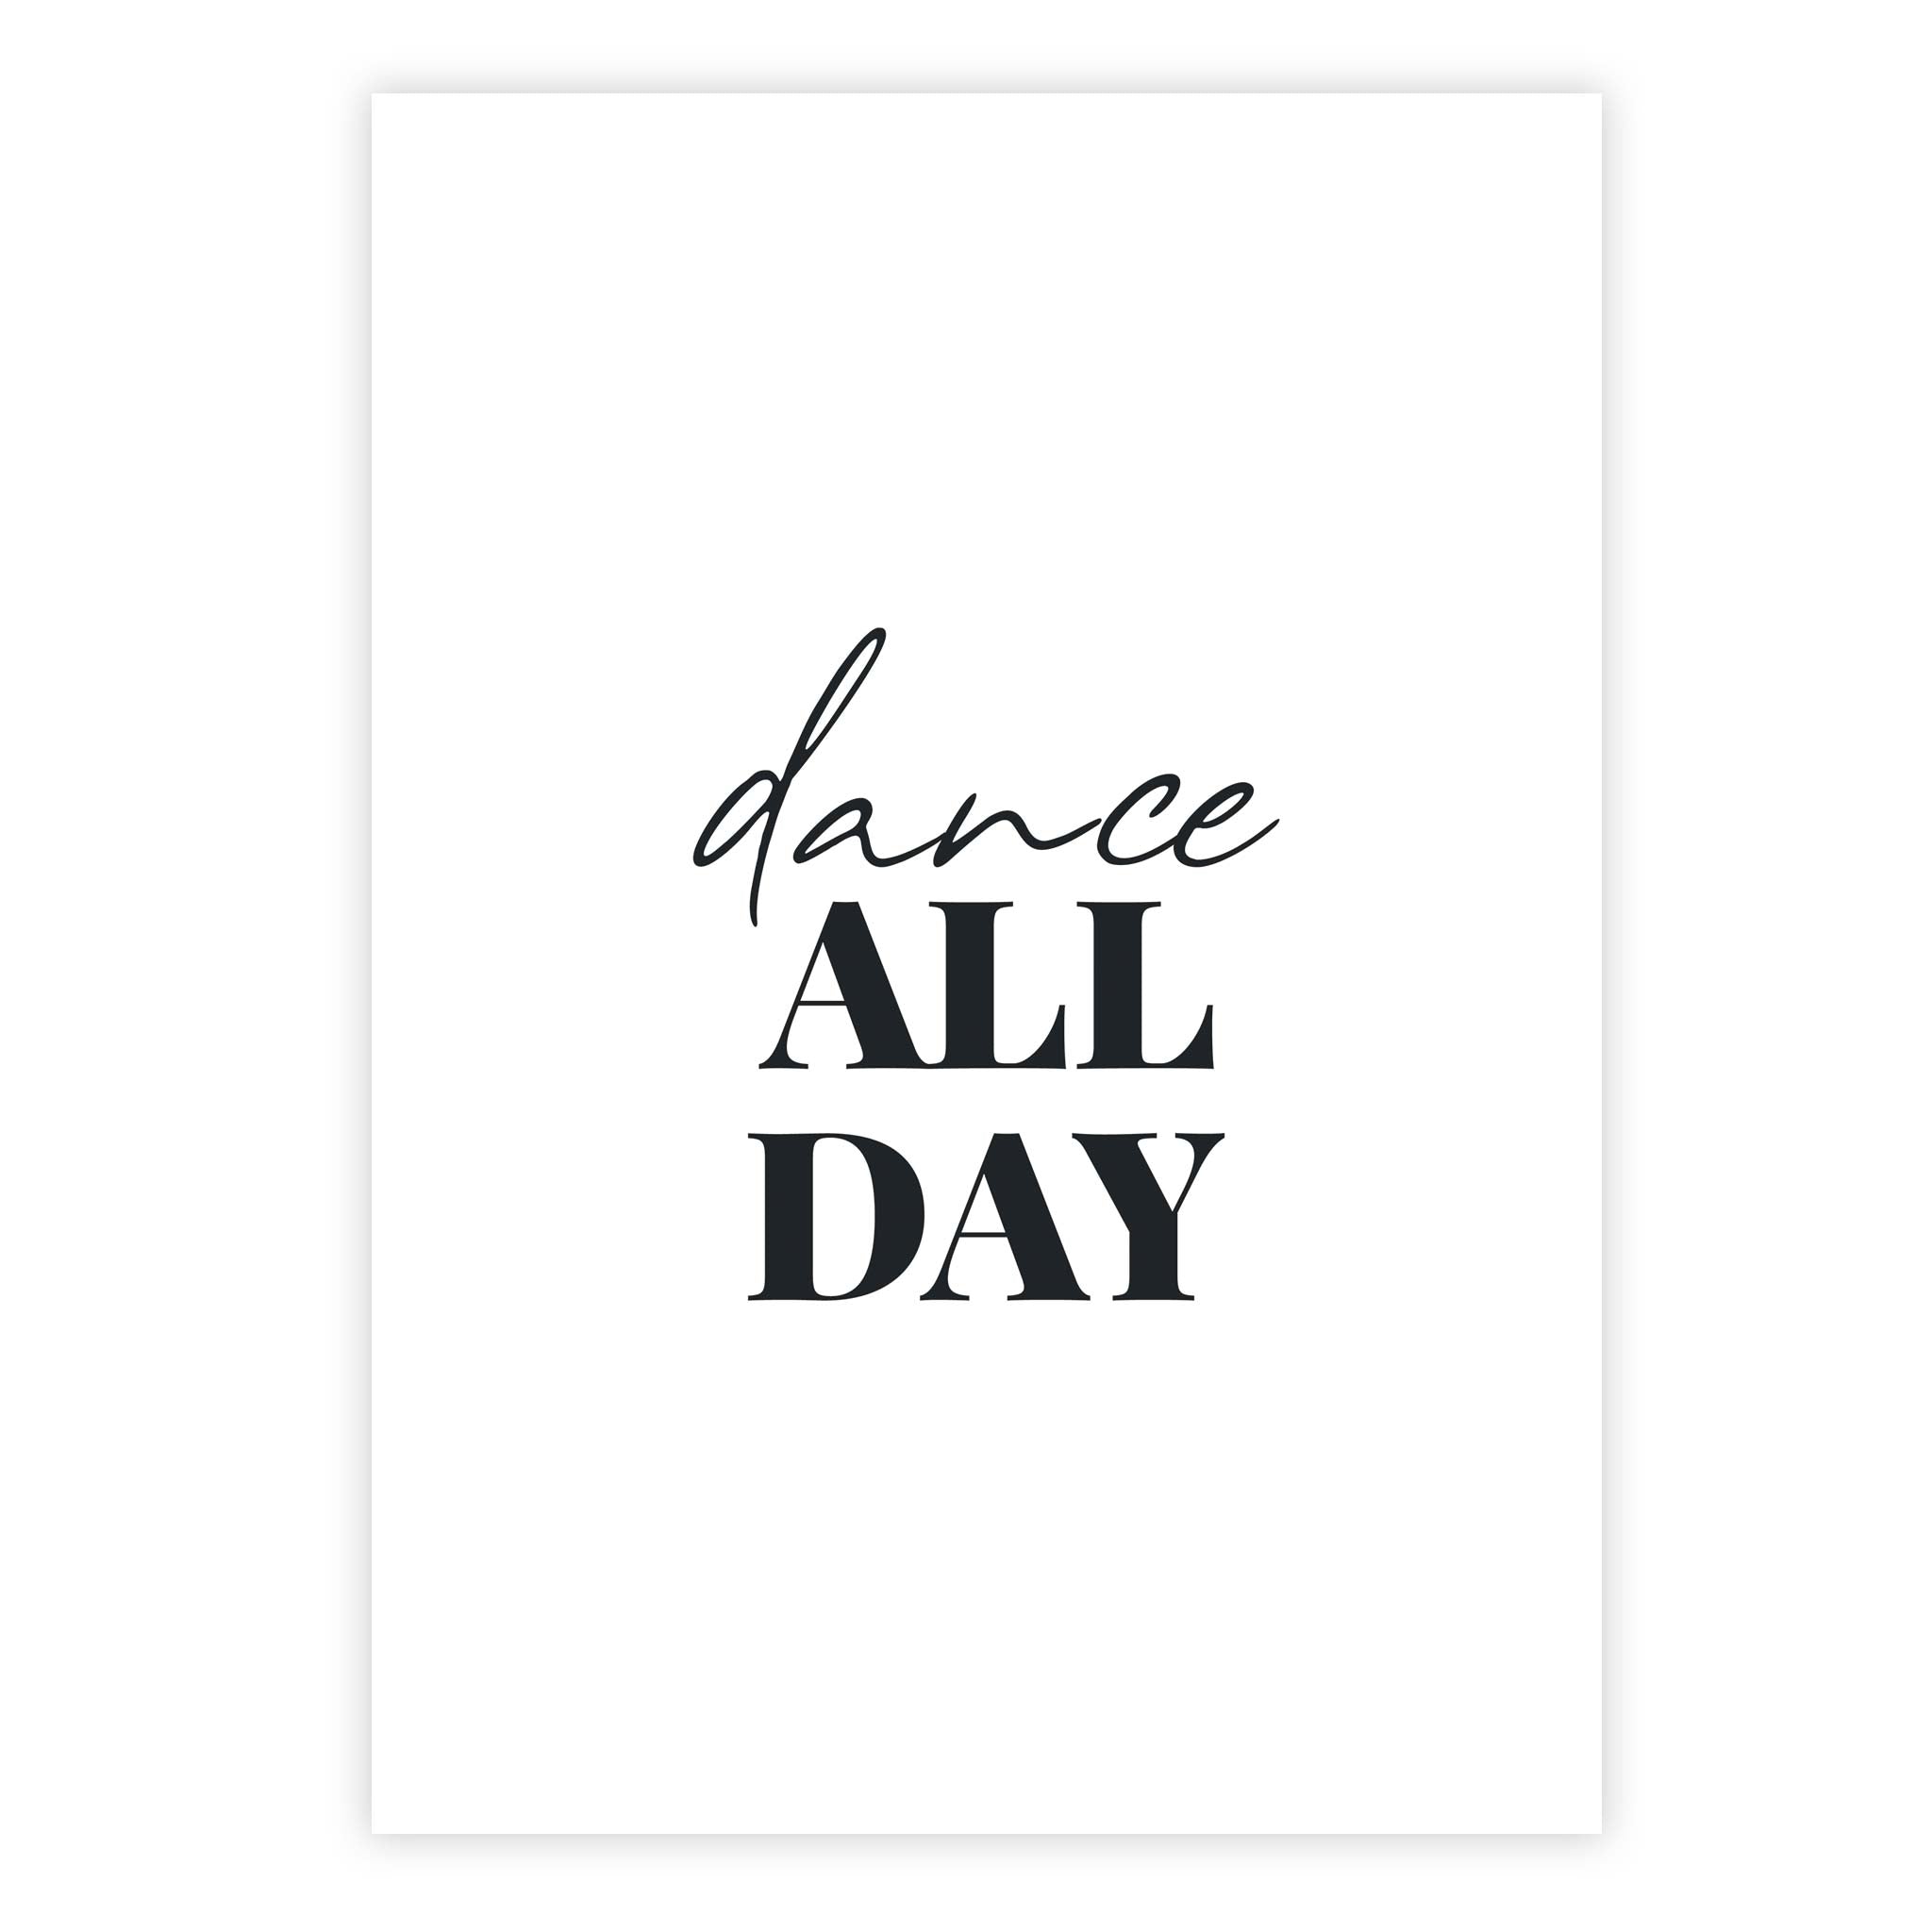 Dance all day